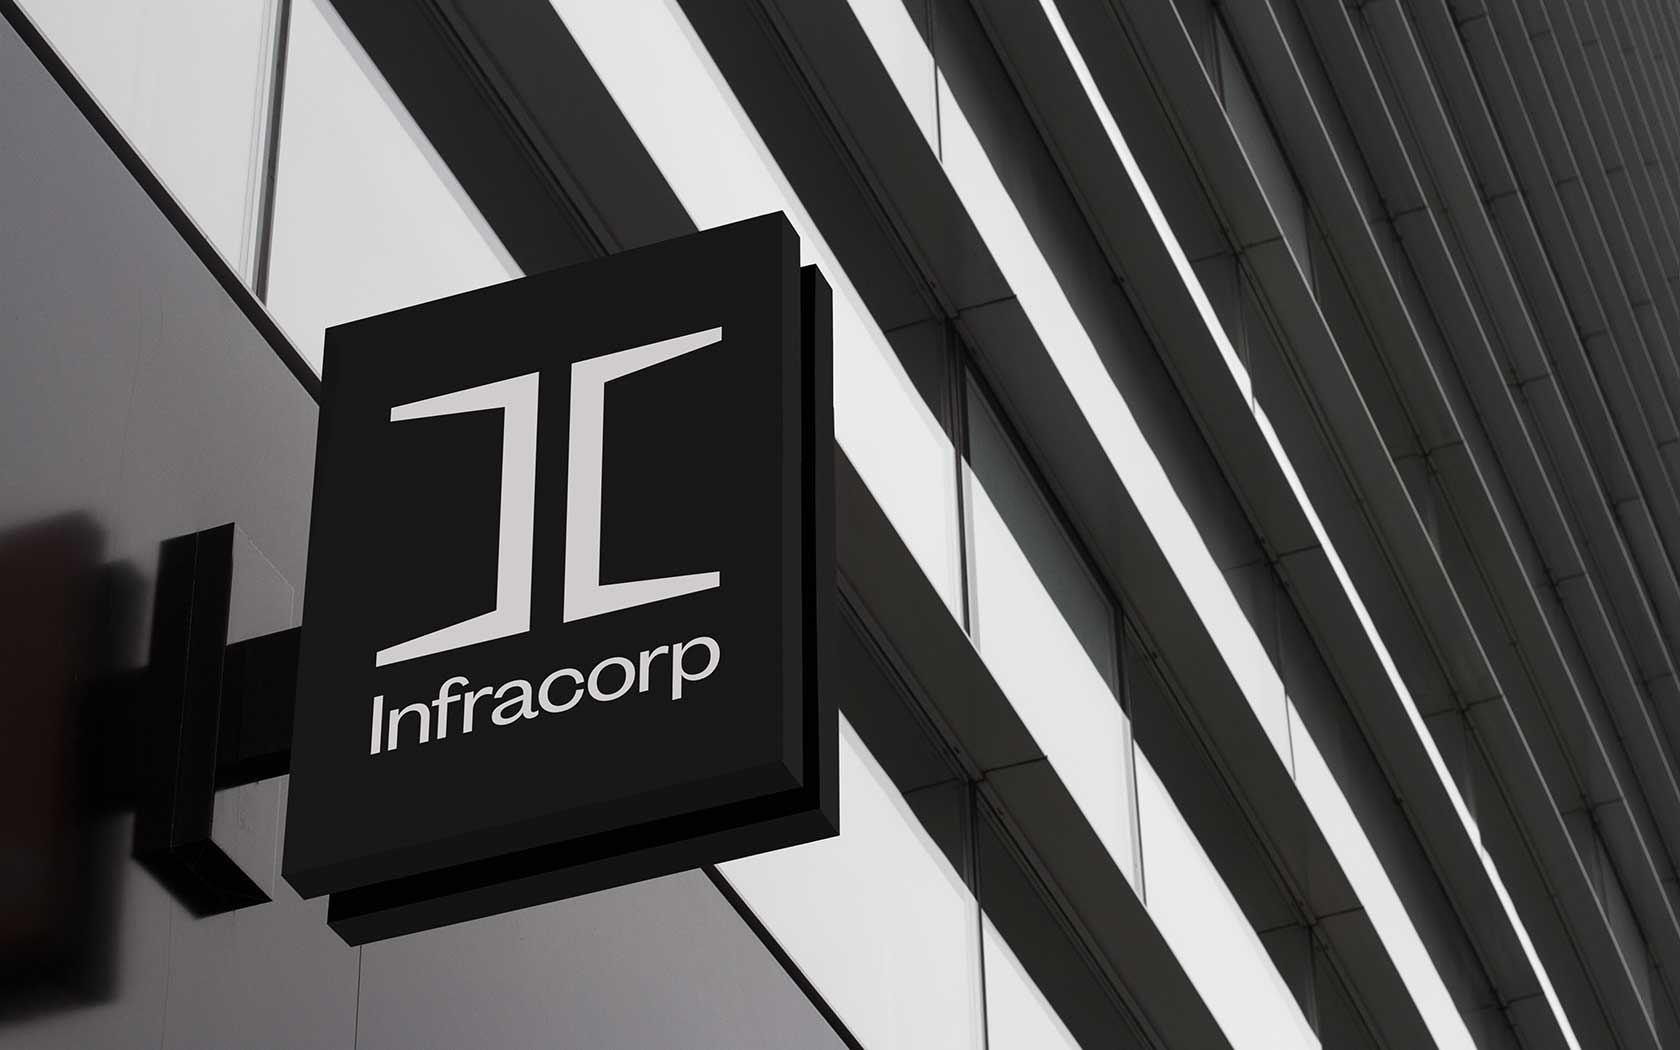 Infracorp. Building Sign